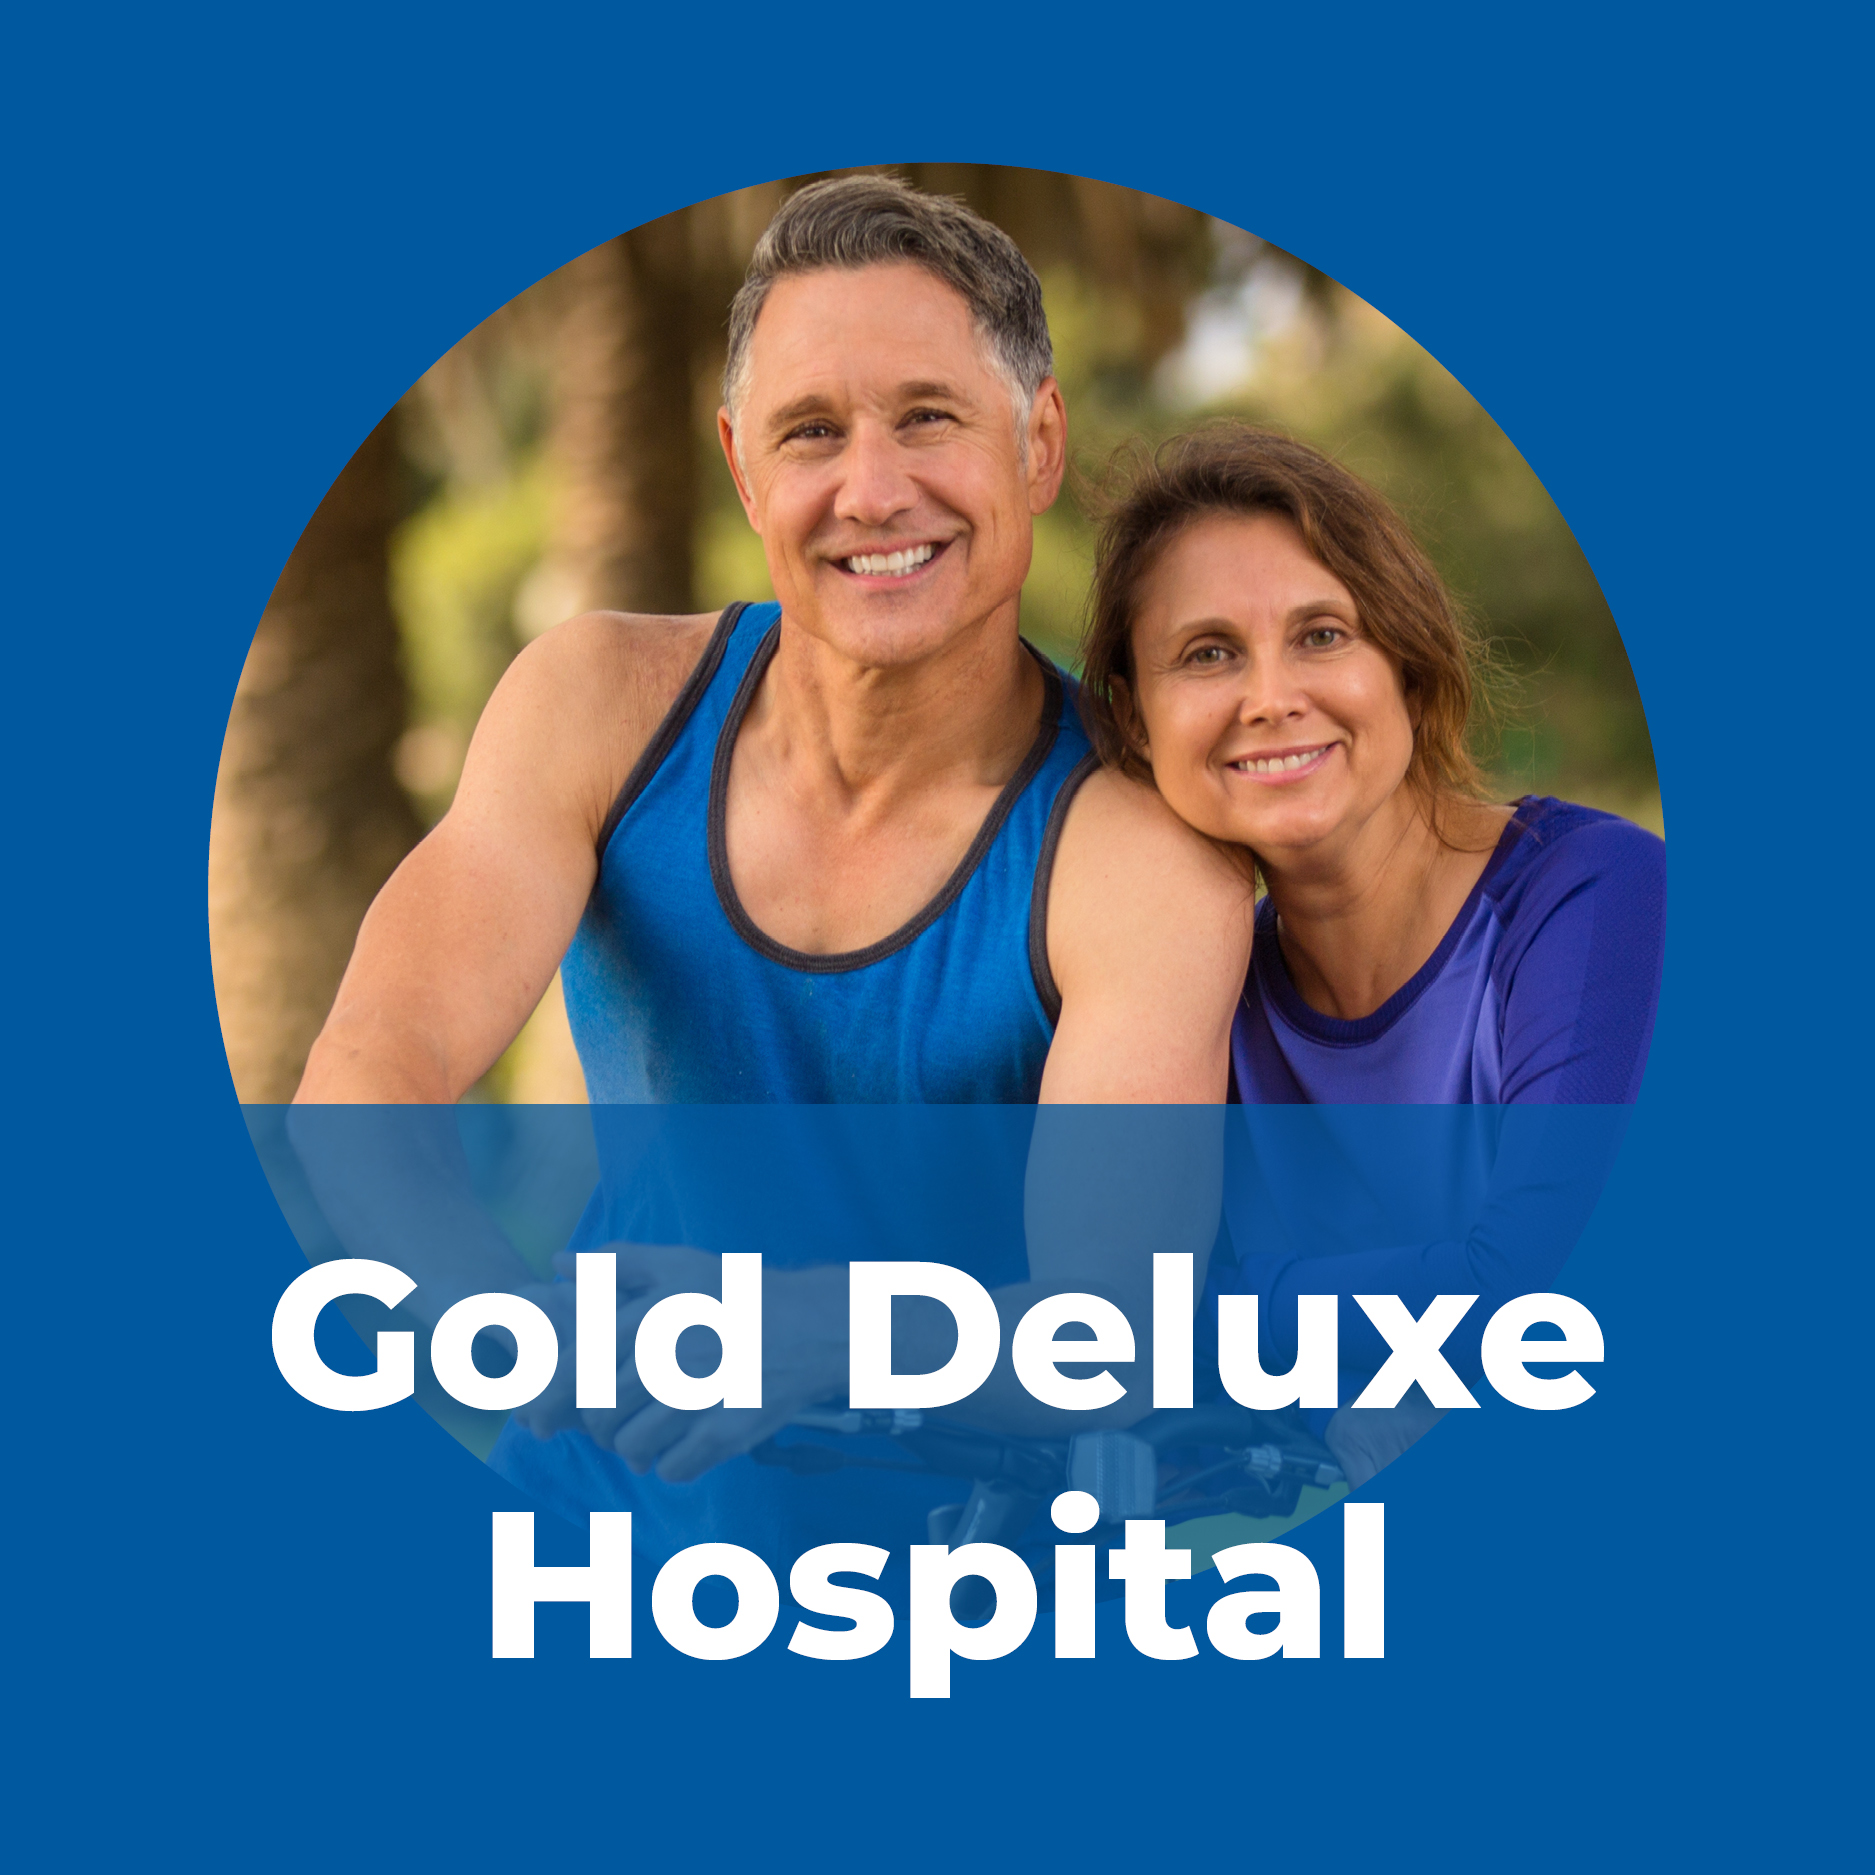 Gold Deluxe Hospital